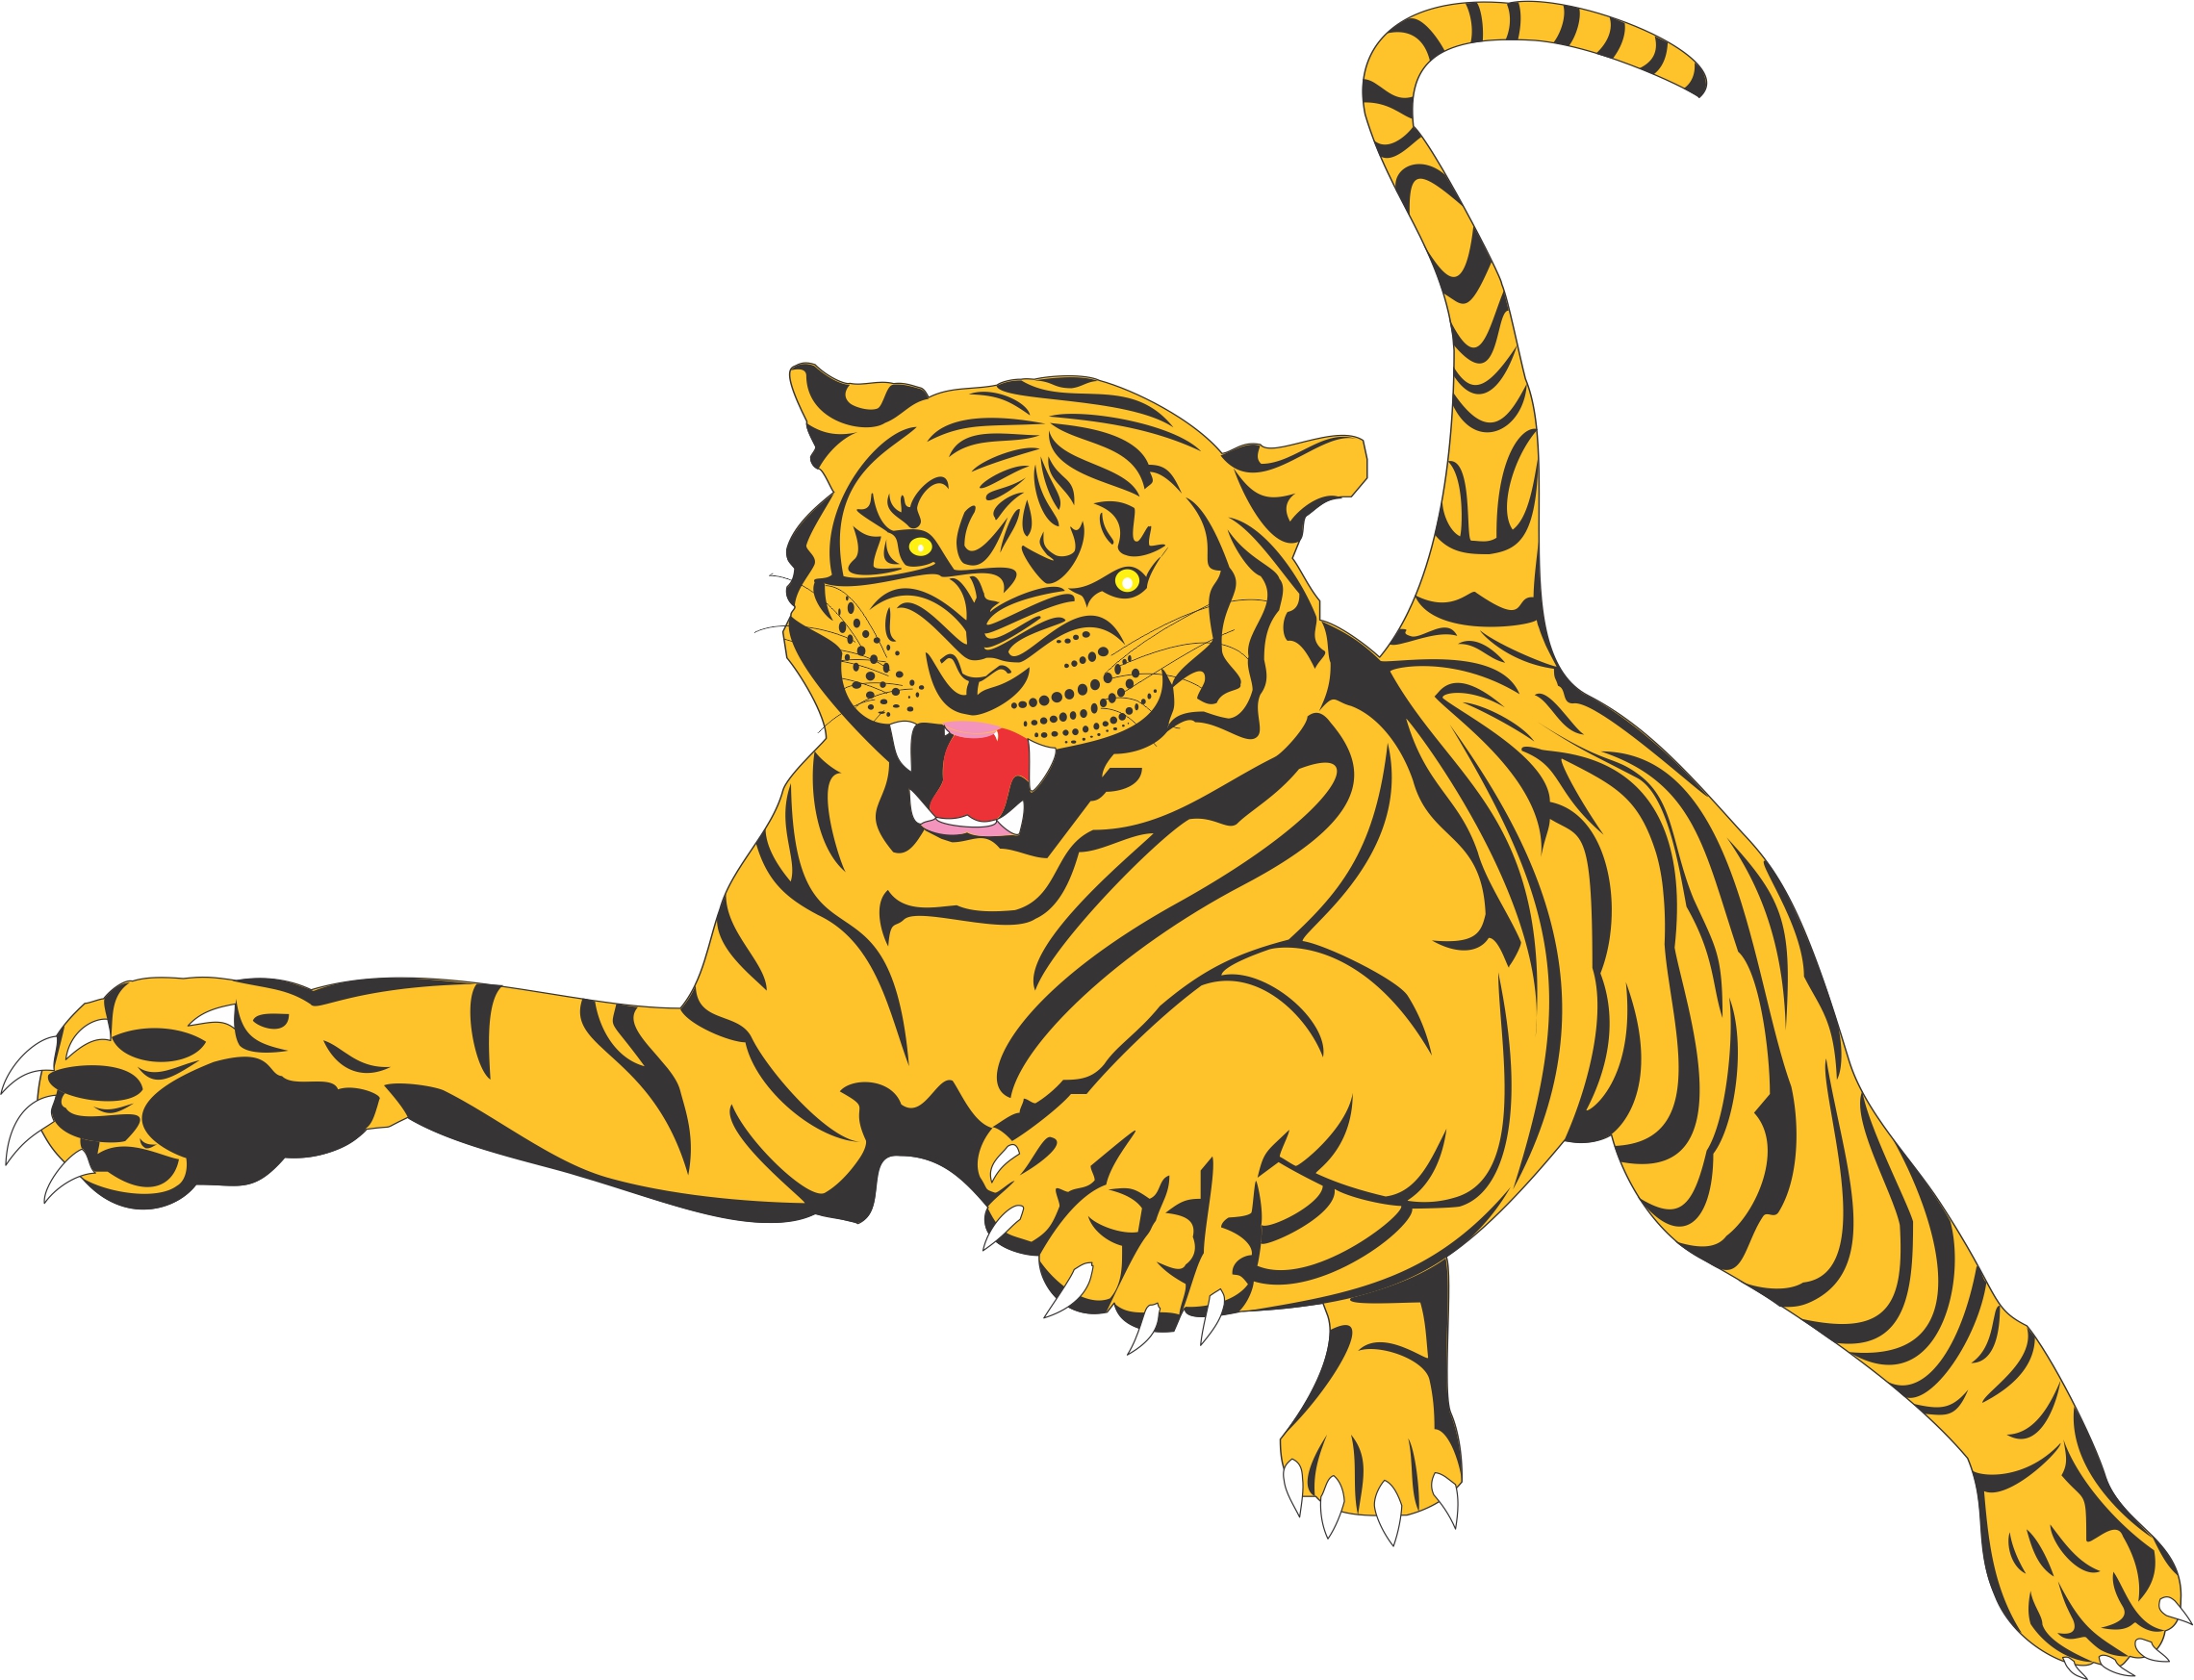 free vector tiger clipart - photo #29